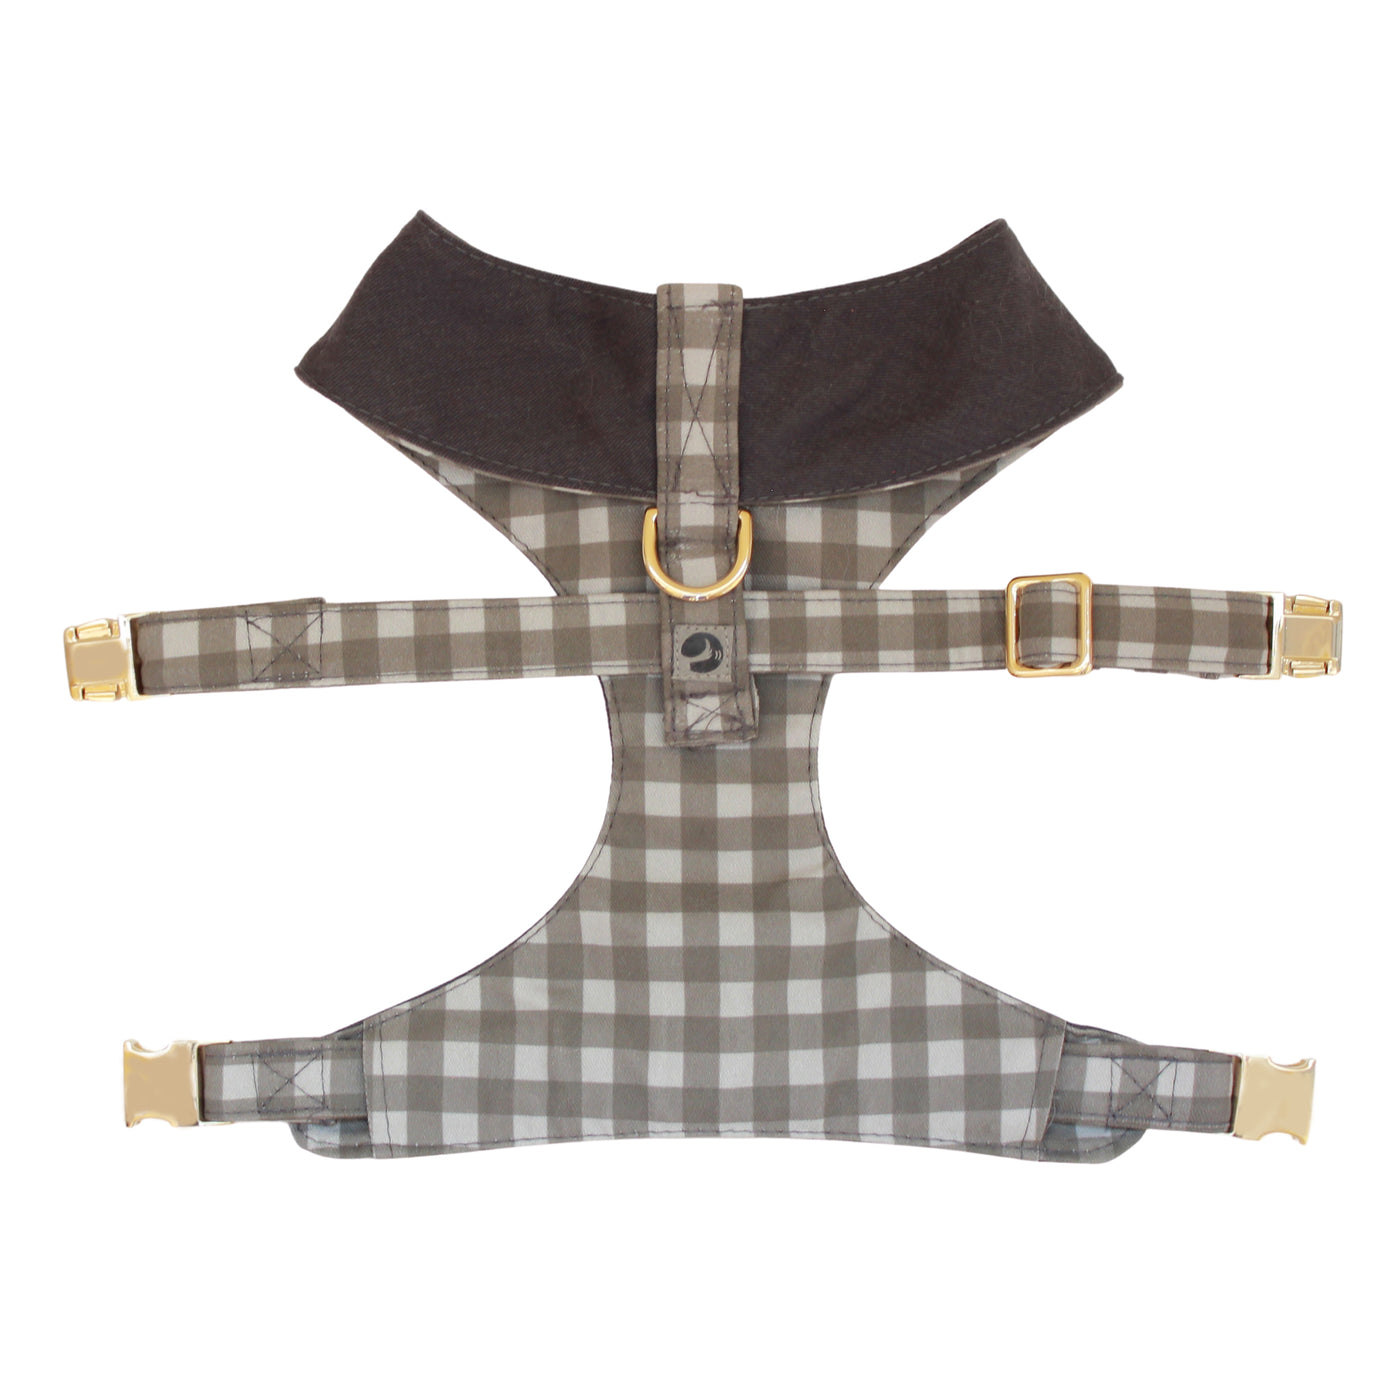 Top view of reversible dog harness with gold hardware in dark gray